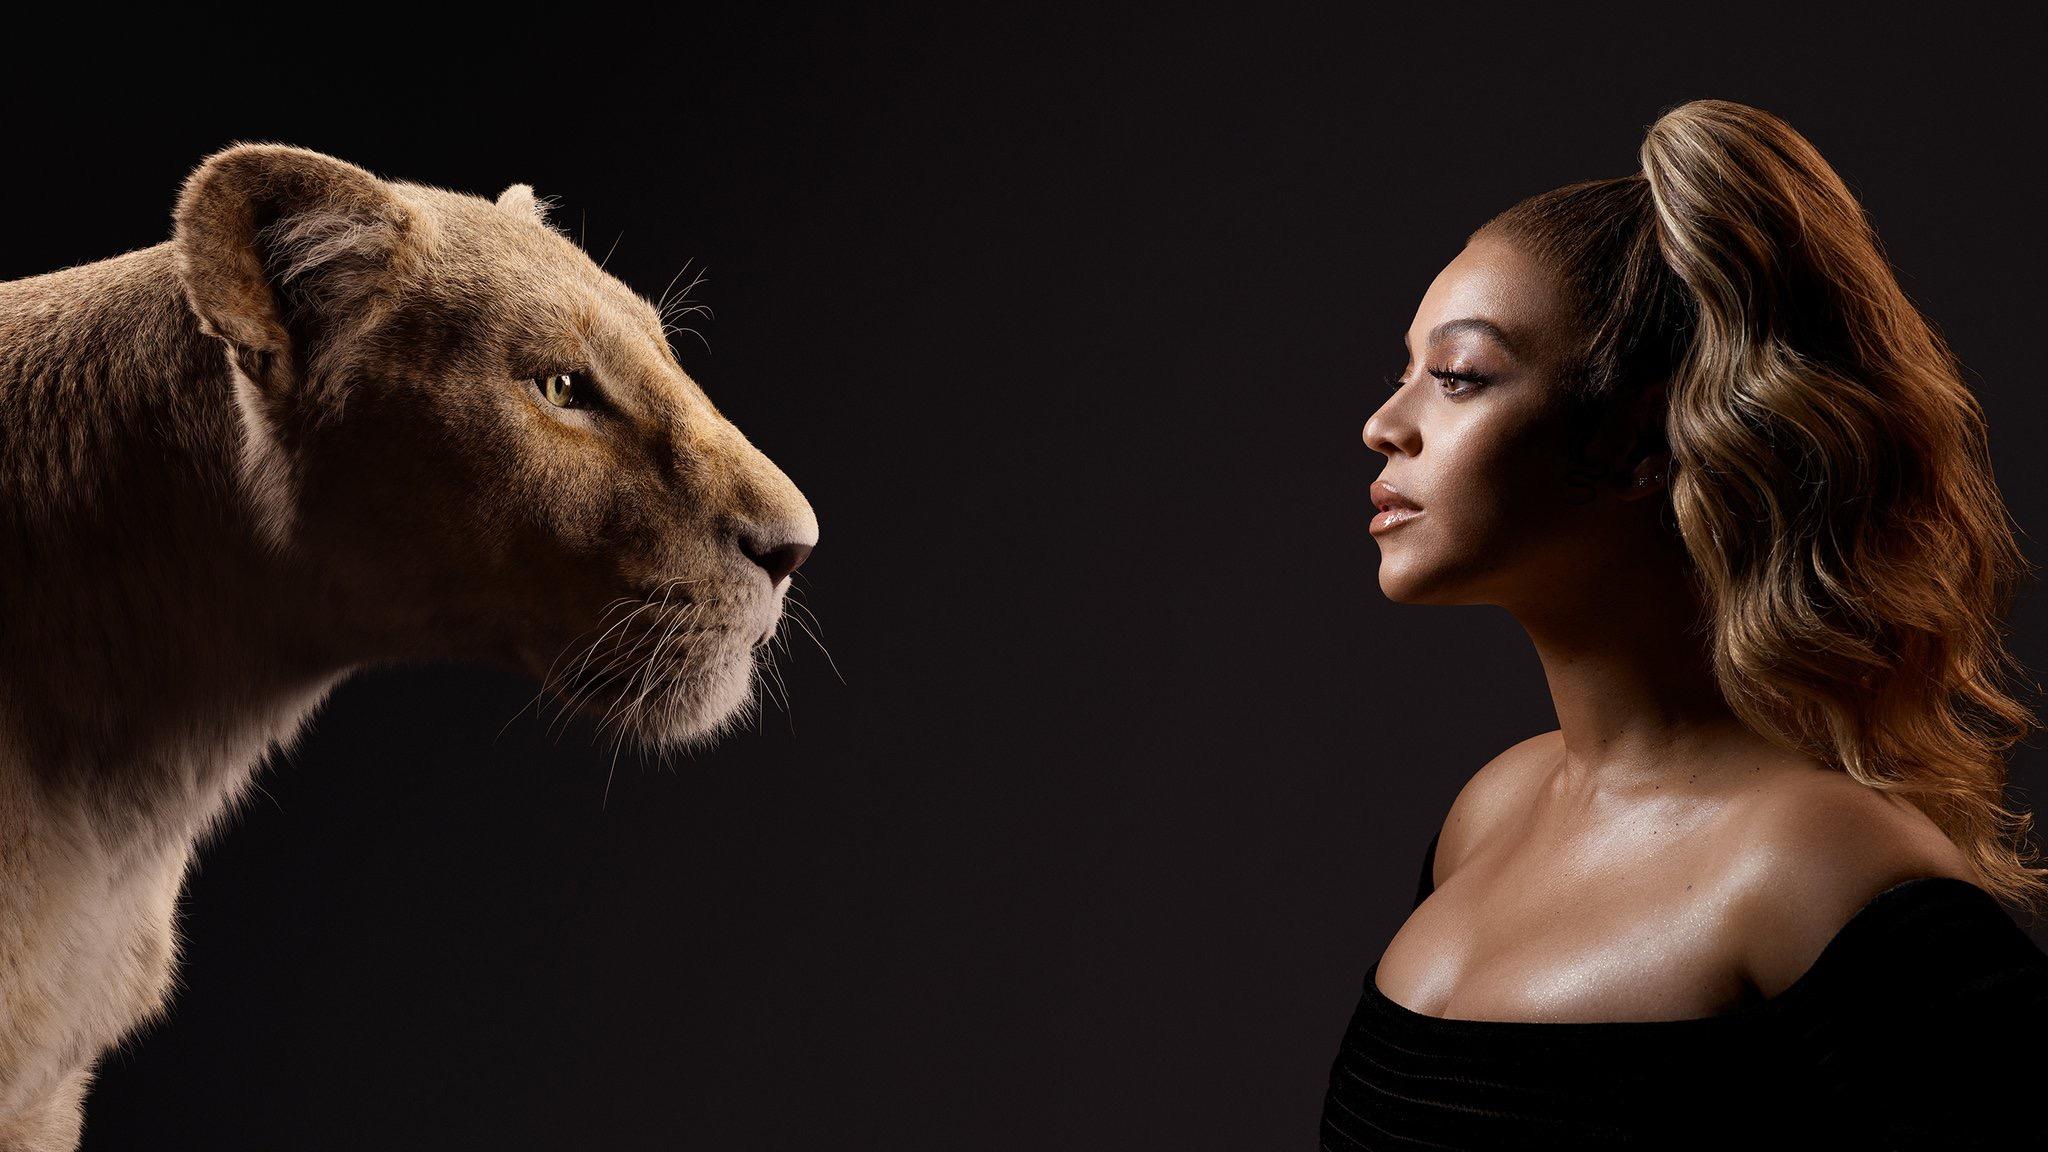 These Promo Posters For 'The Lion King' Remake Are Absolutely Stunning